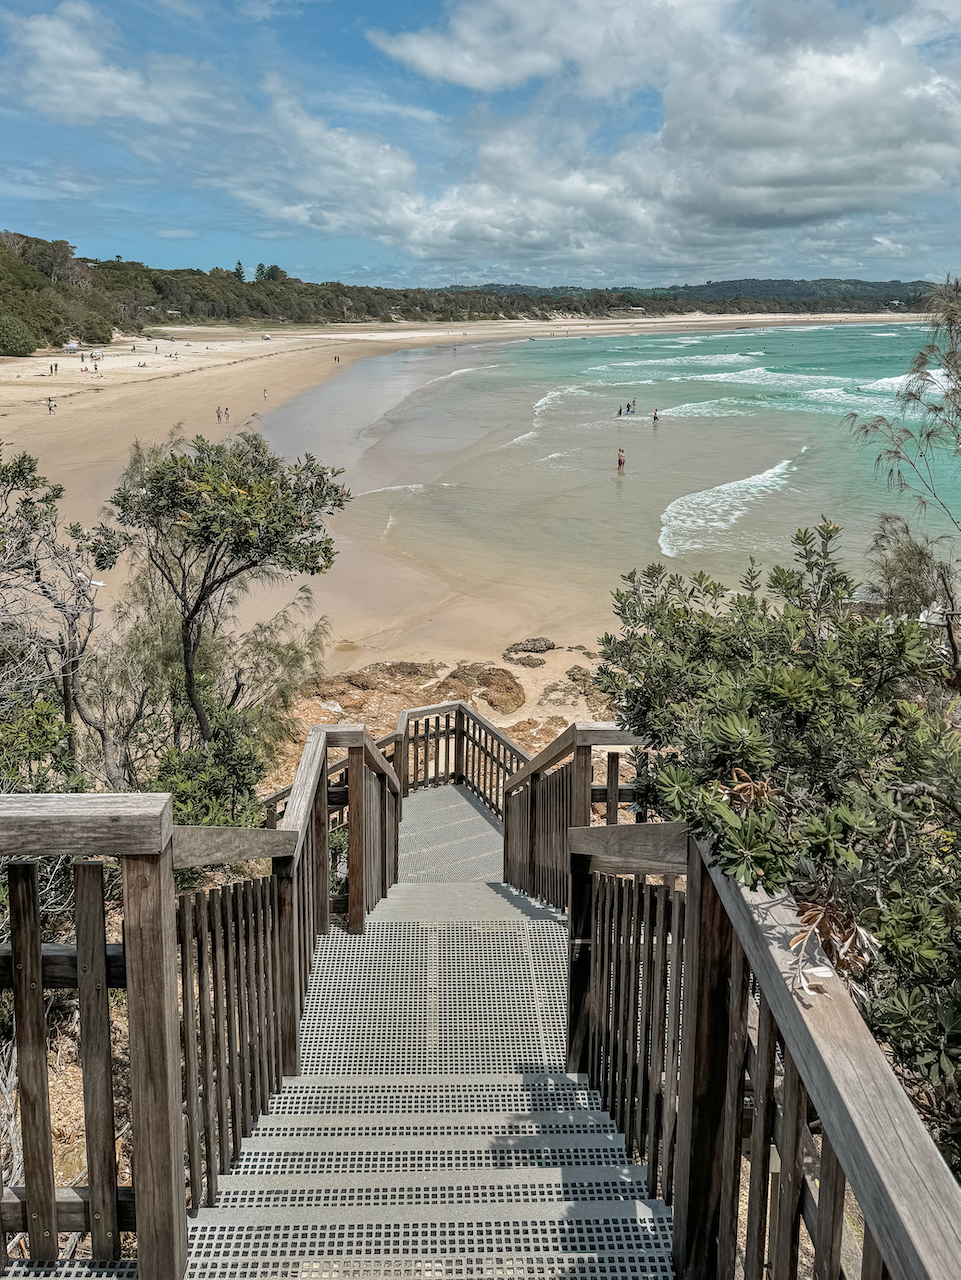 The staircase at the Pass - Byron Bay - New South Wales - Australia